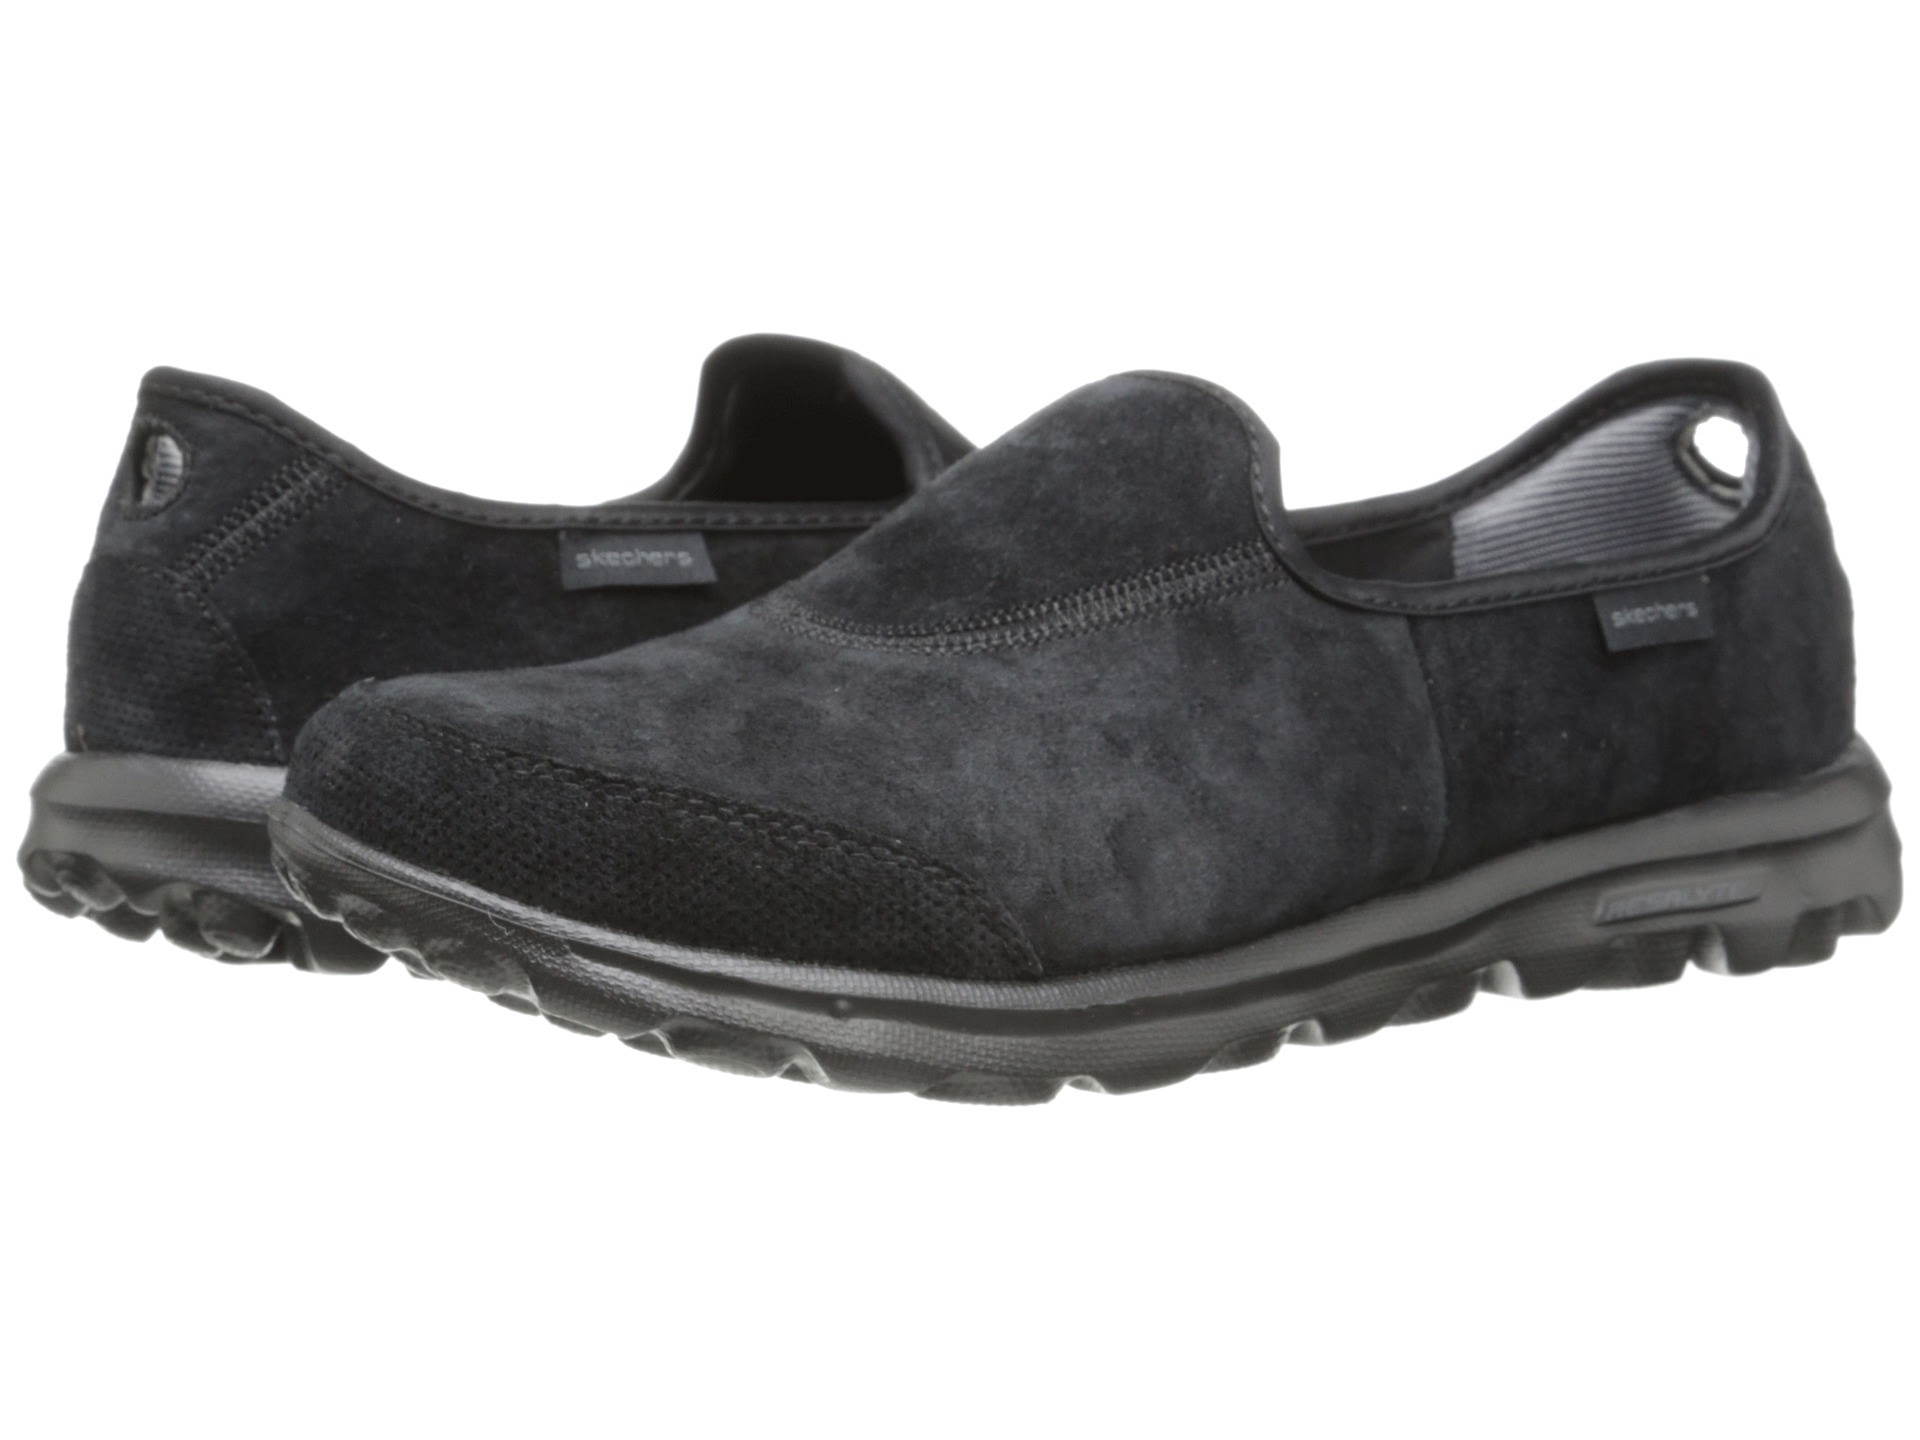 Skechers Performance Go Walk Black | Shipped Free at Zappos